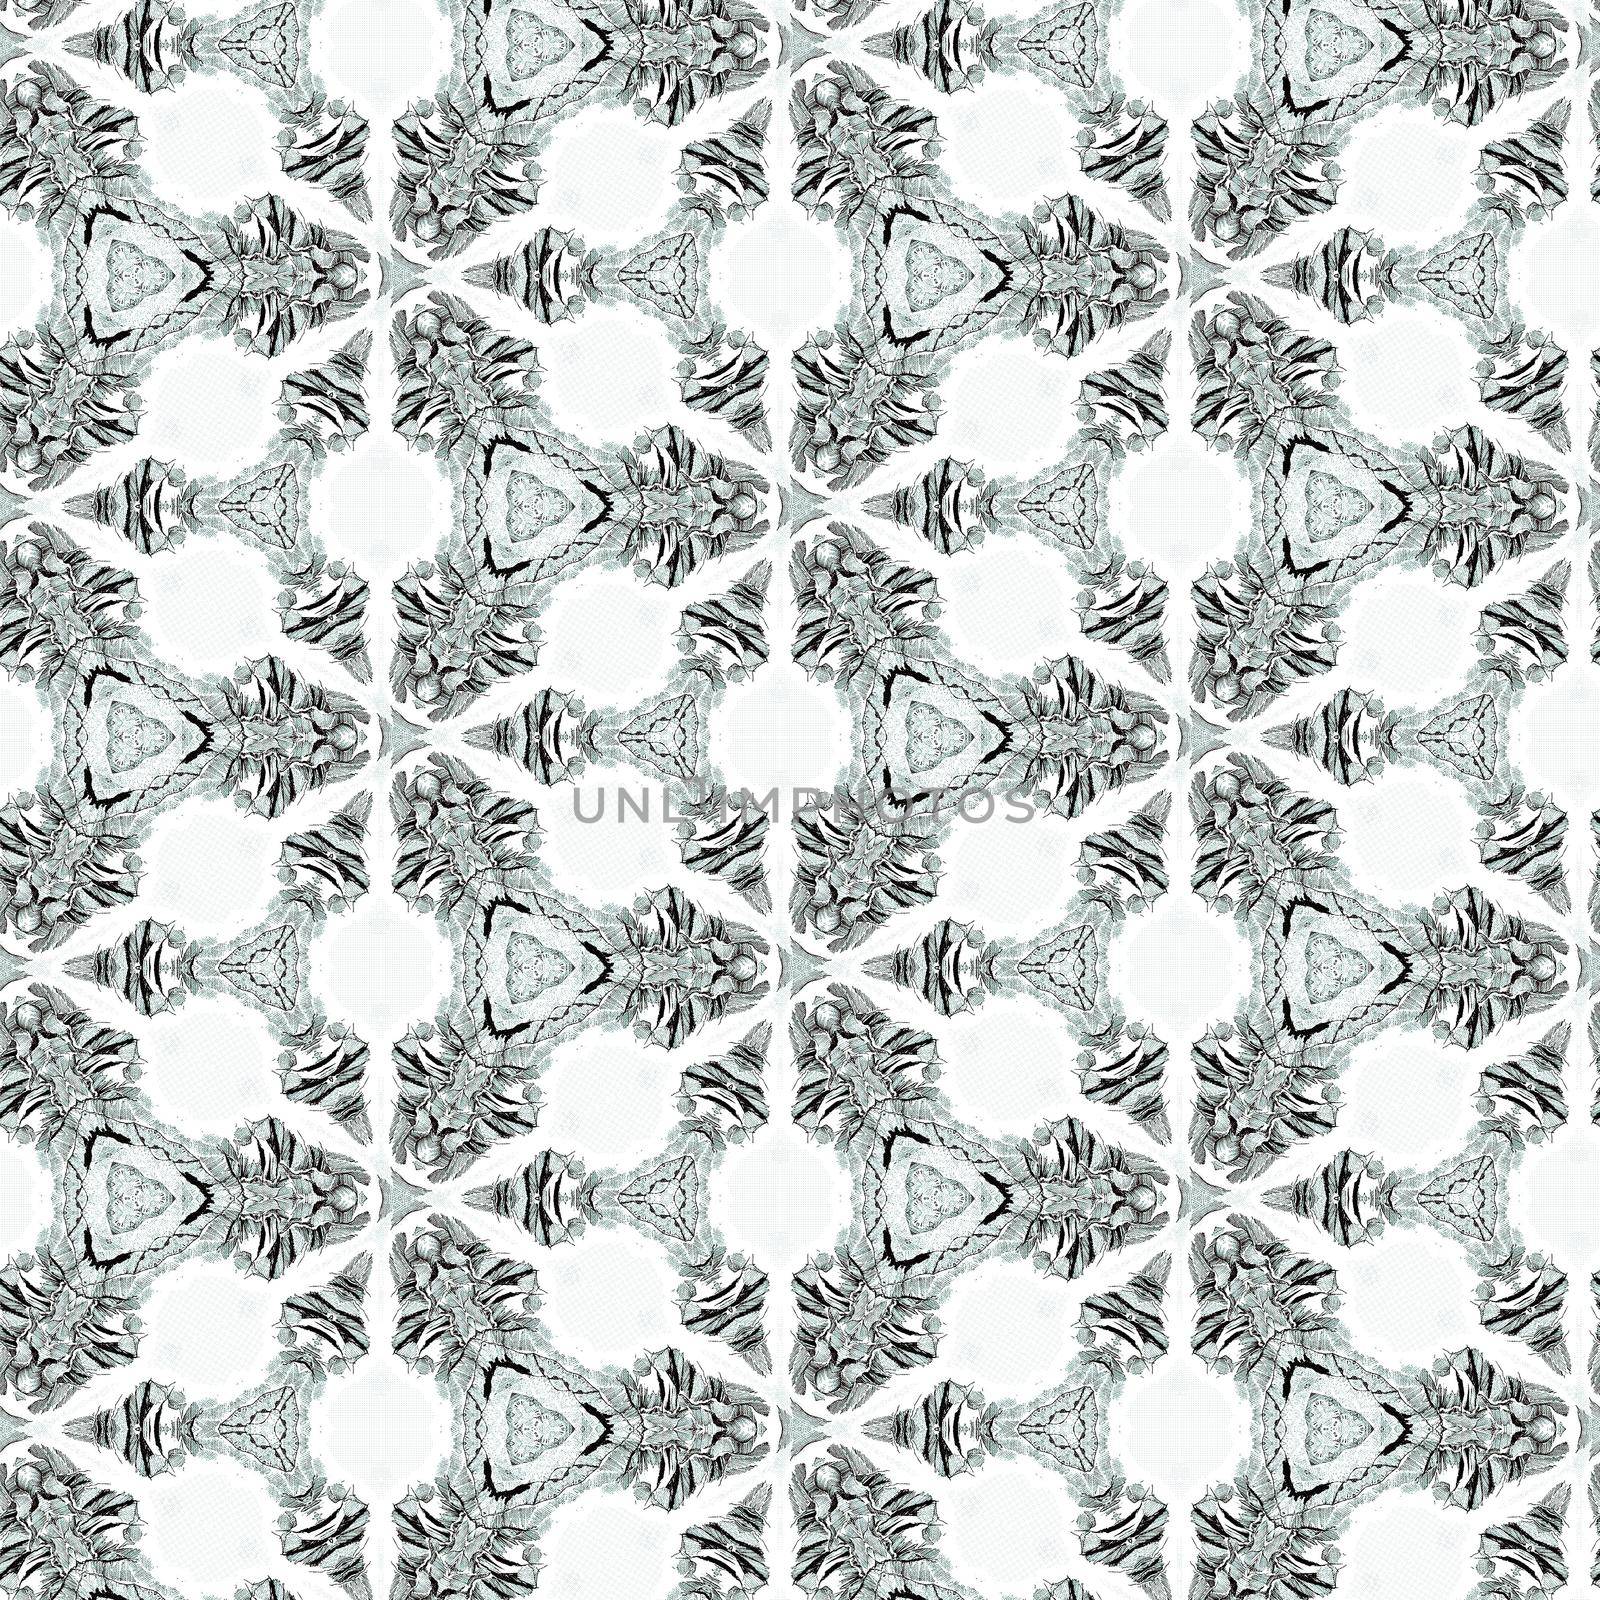 Monochromatic patterns and designs on solid sheet of wallpaper. Concept of home decor and interior designing